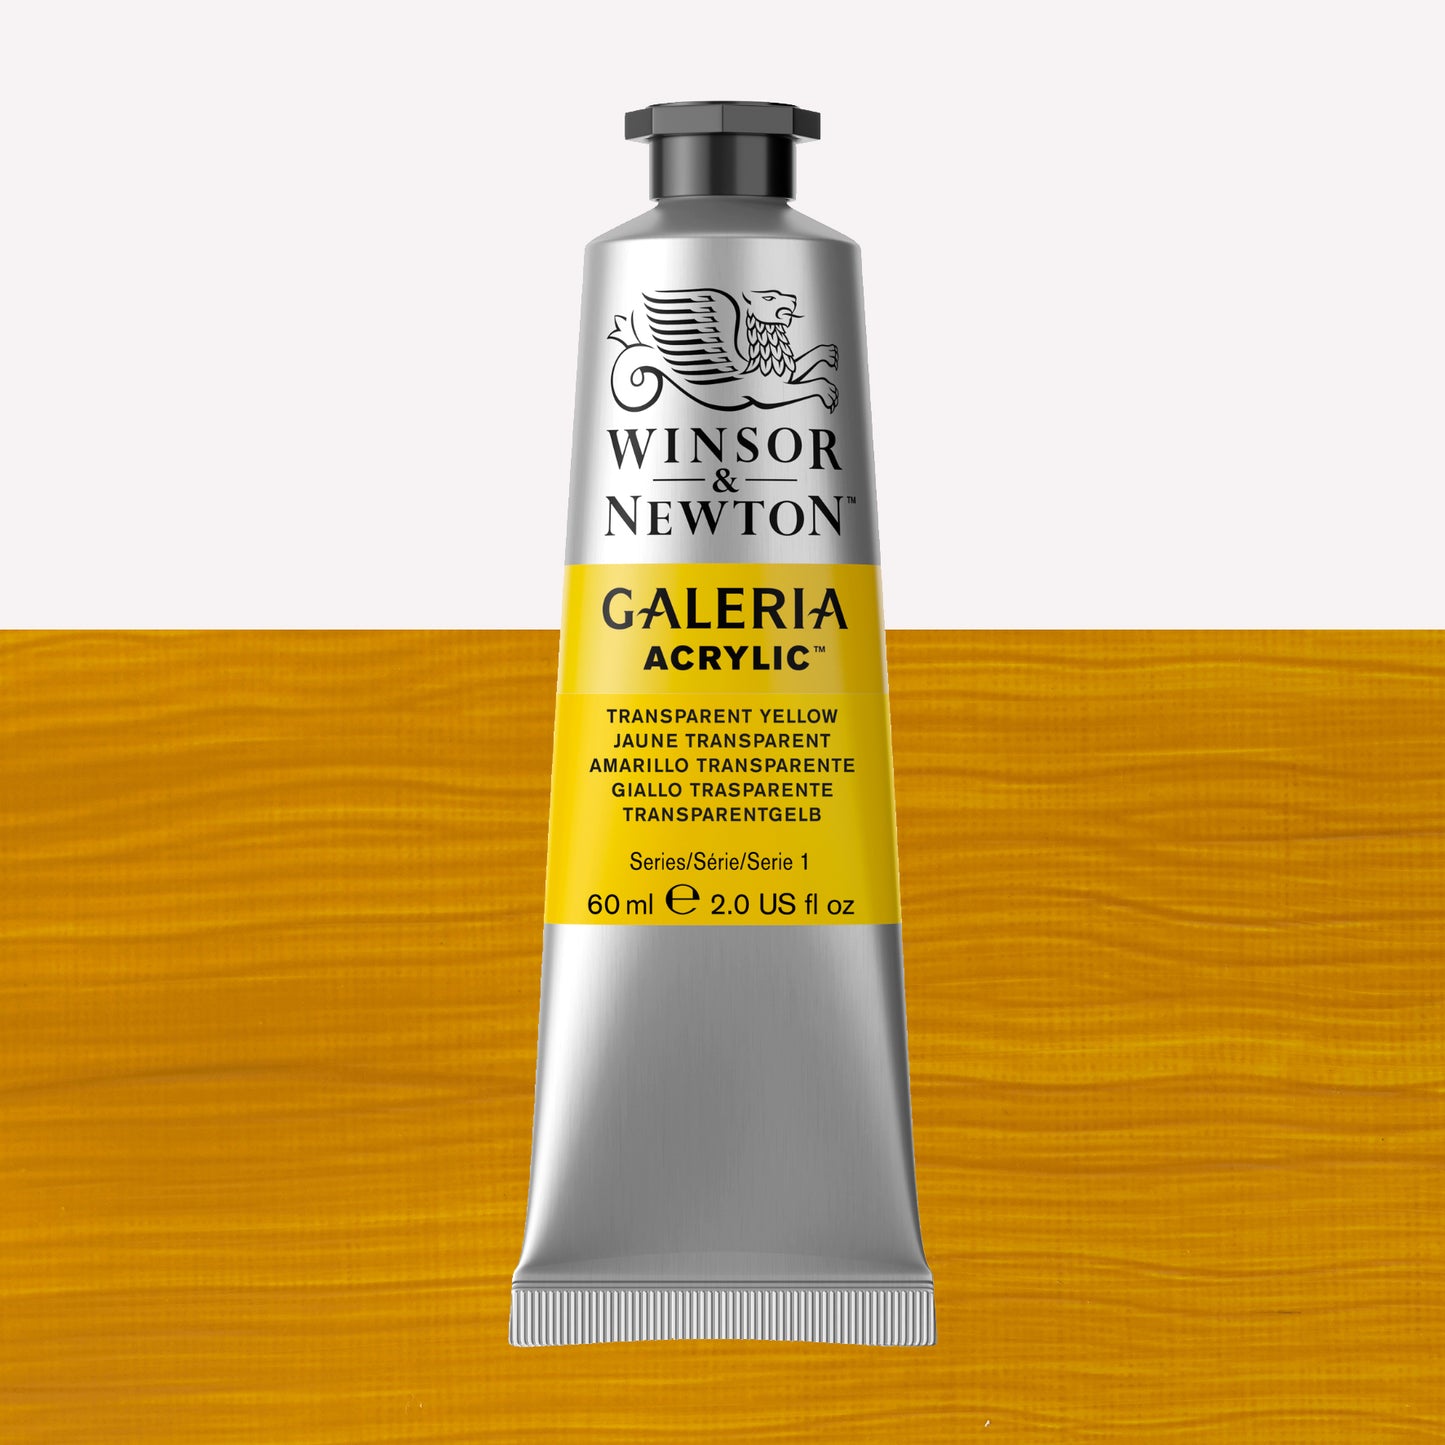 A 60ml tube of vibrant Galeria Acrylic paint in the shade Transparent Yellow . This paint, made by Winsor and Newton, is packaged in a silver tube with a black lid. 